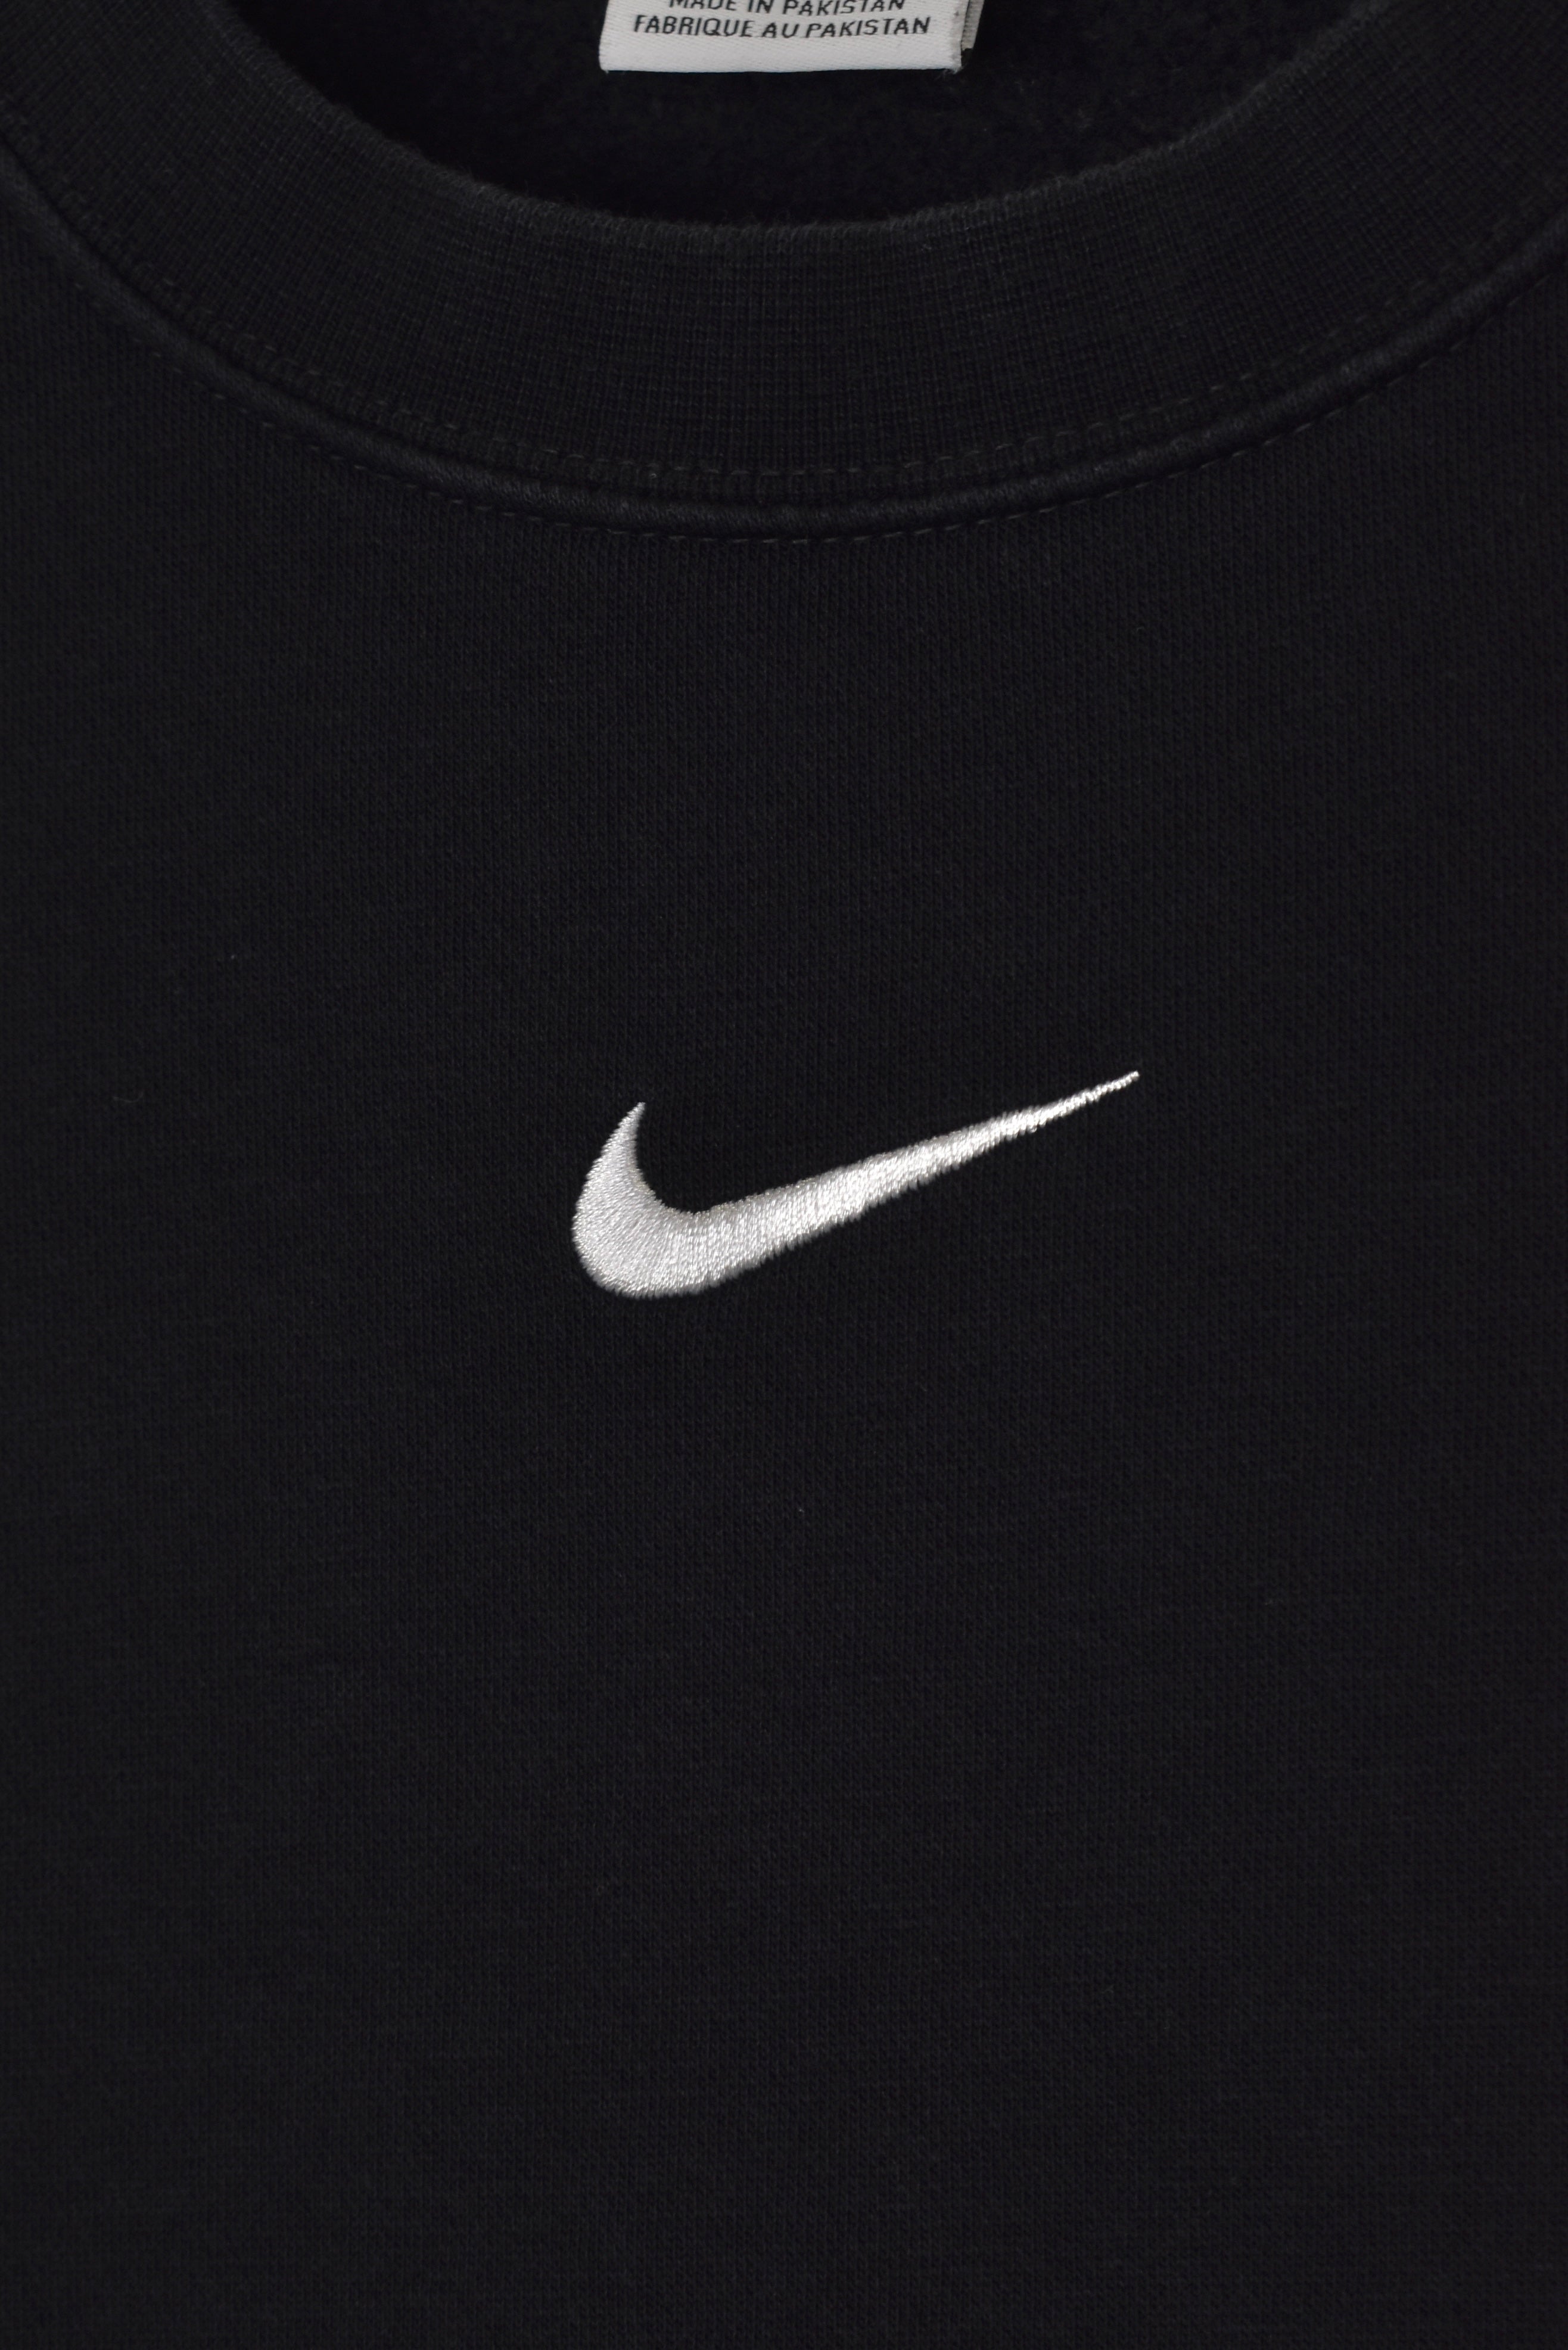 Nike Small Logo Pullover Hoodie 